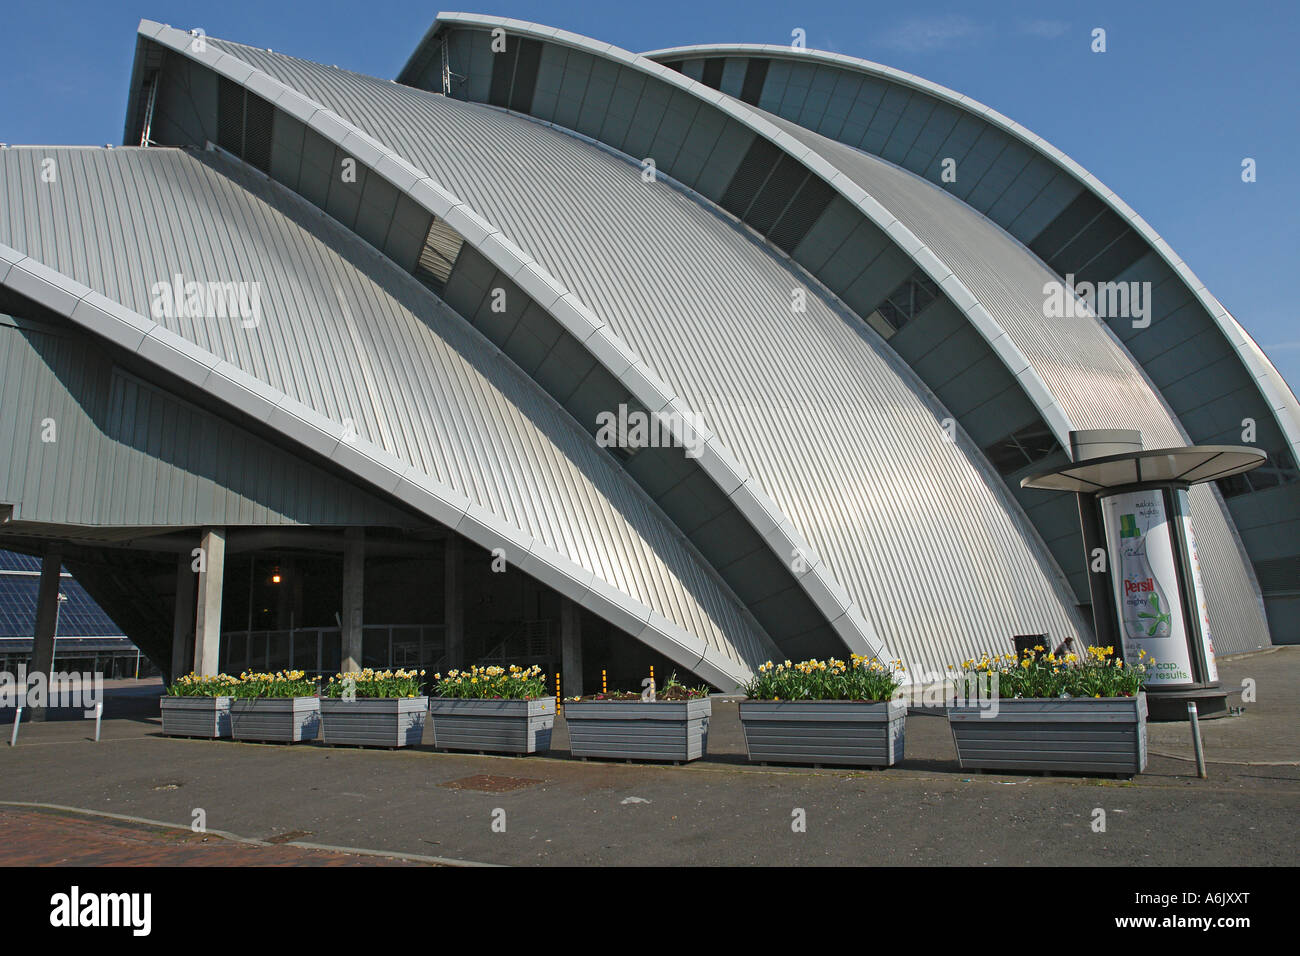 West end of Clyde Auditorium (also called Armadillo) in Glasgow Exhibition Centre with flower baskets in the foreground Stock Photo